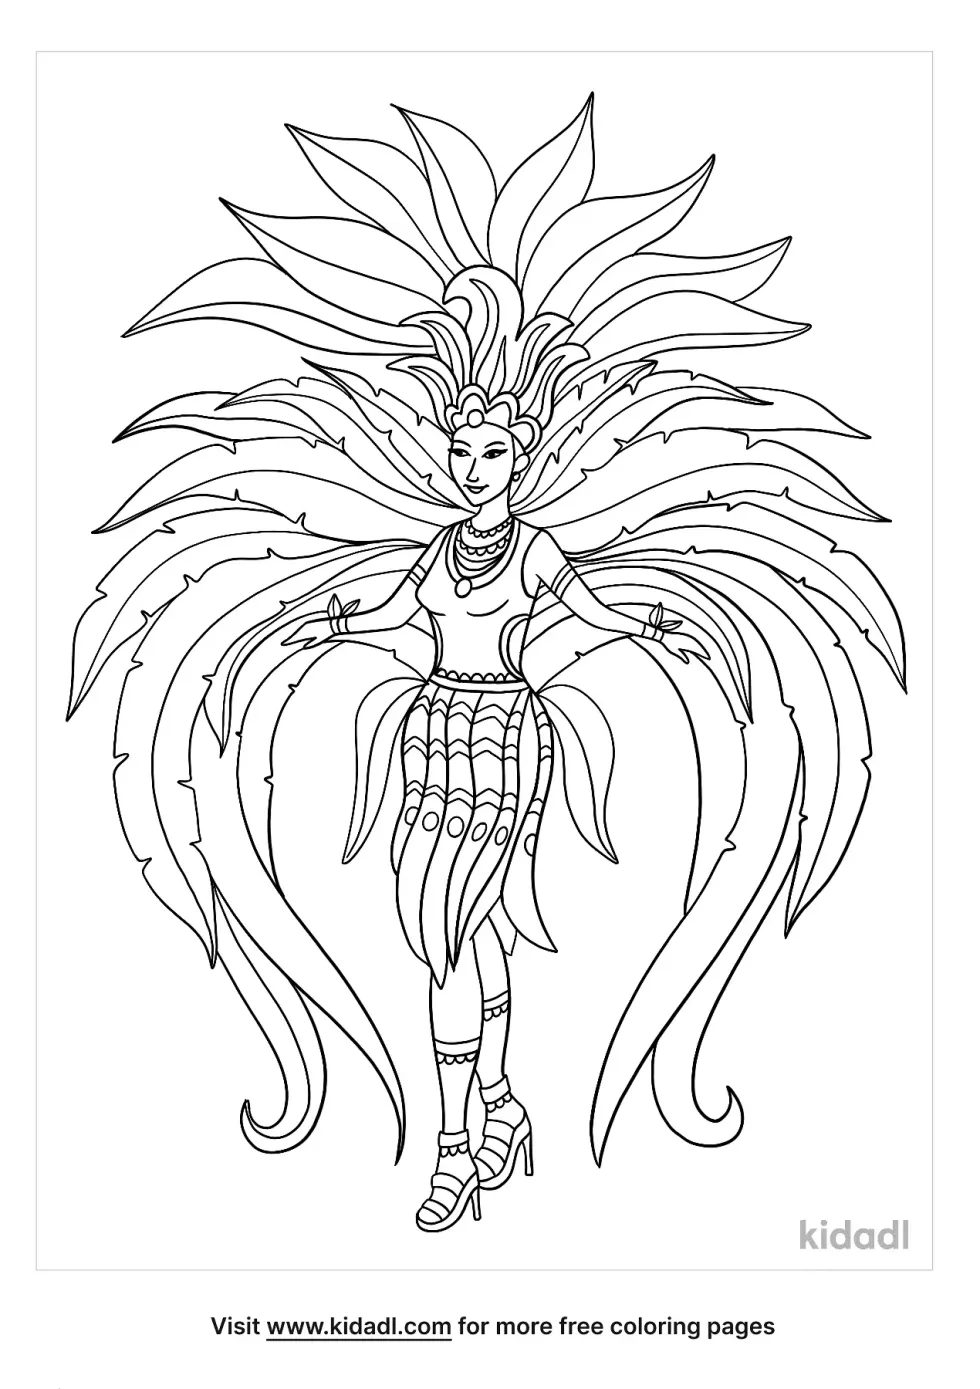 Carnival Lady Costume Coloring Page